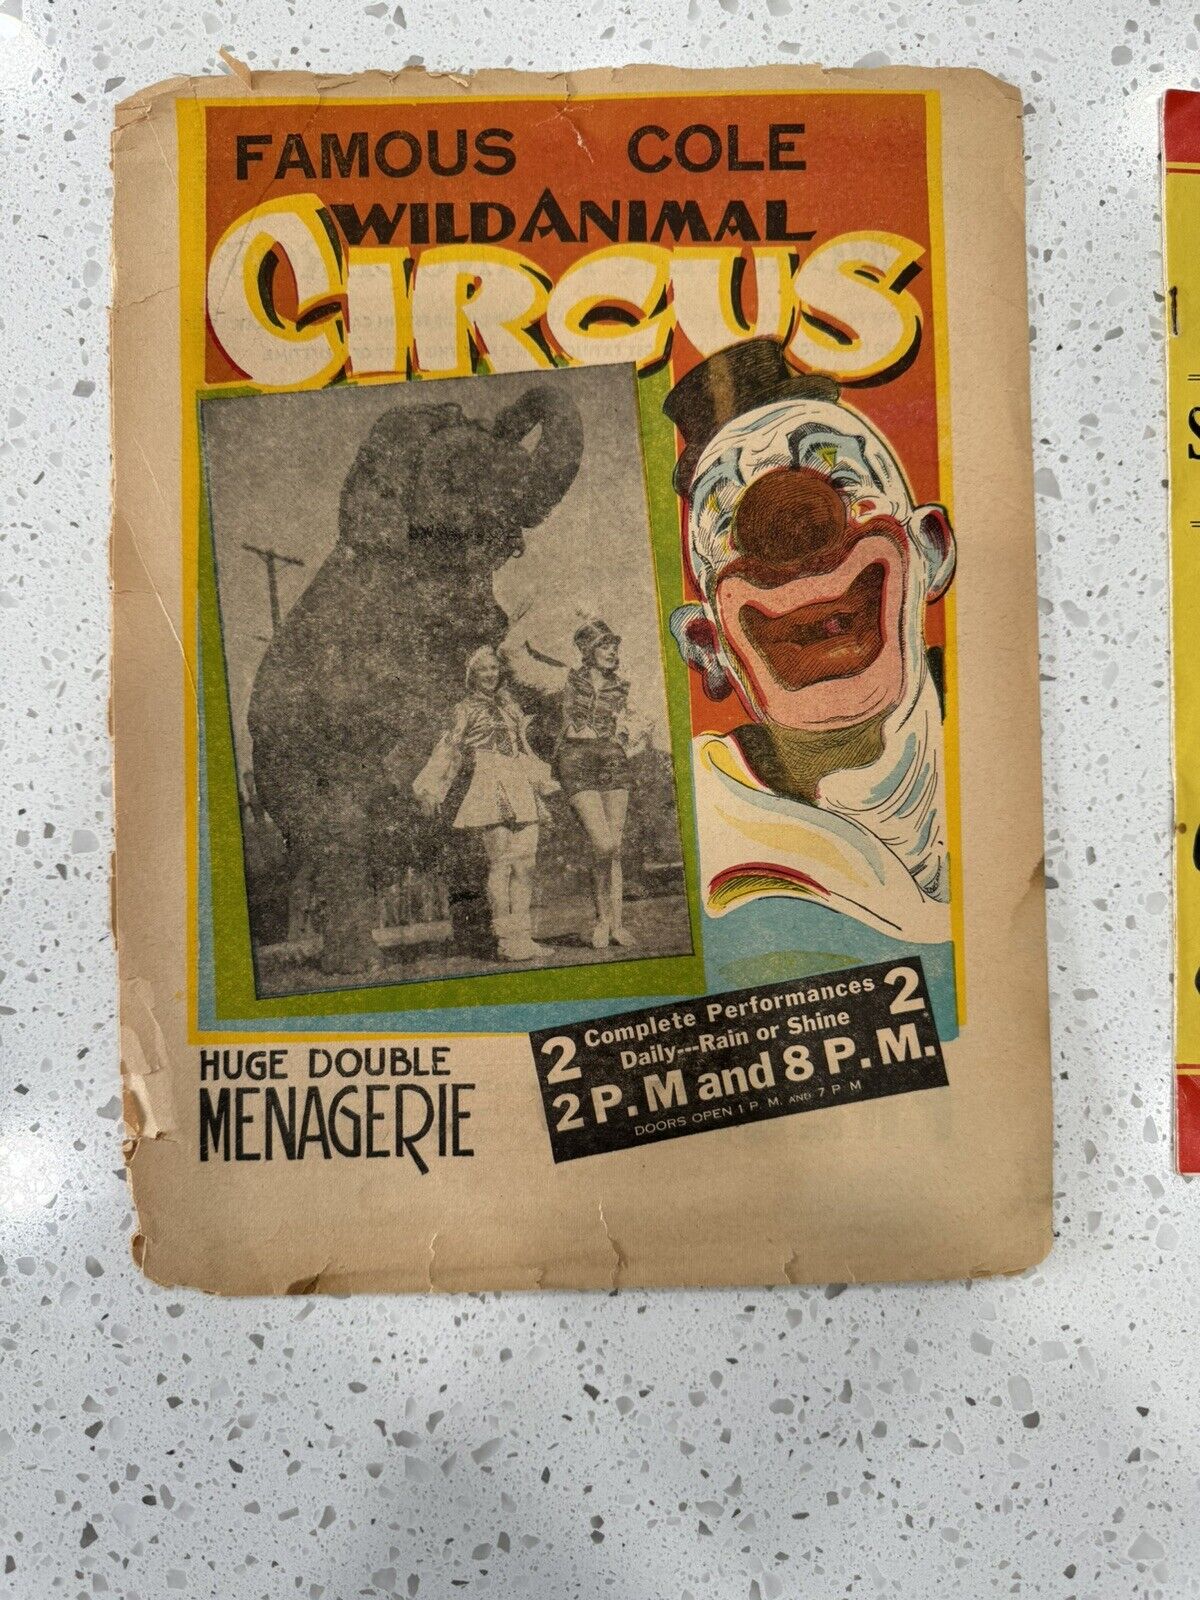 Vintage Authentic Circus Advertising & Posters Clyde Beatty Cole Bro 1959